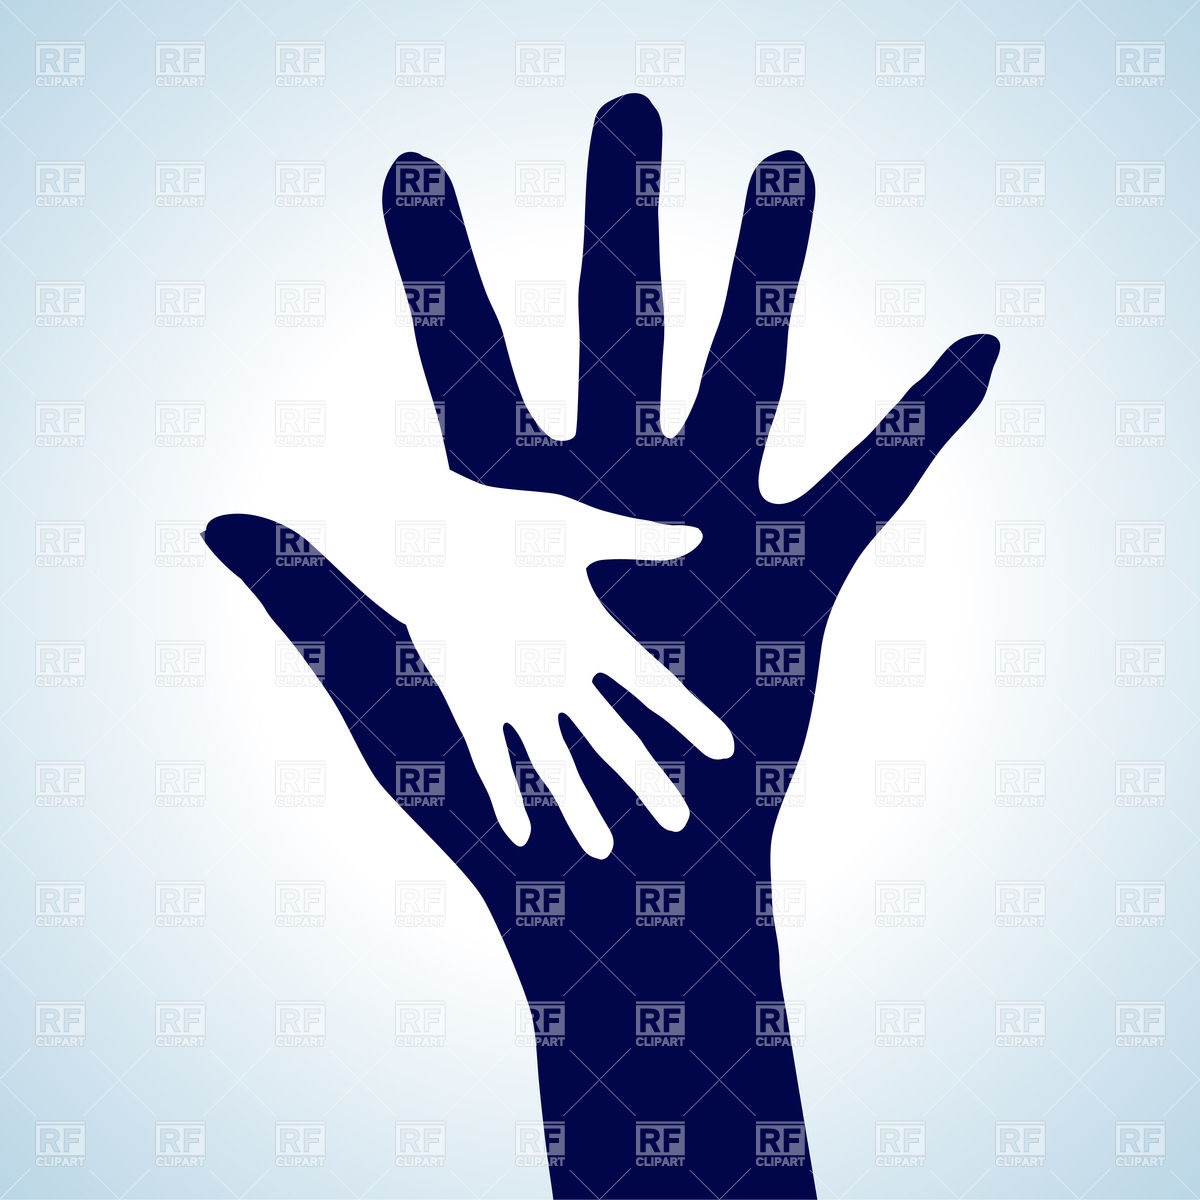 Helping Hand Icon